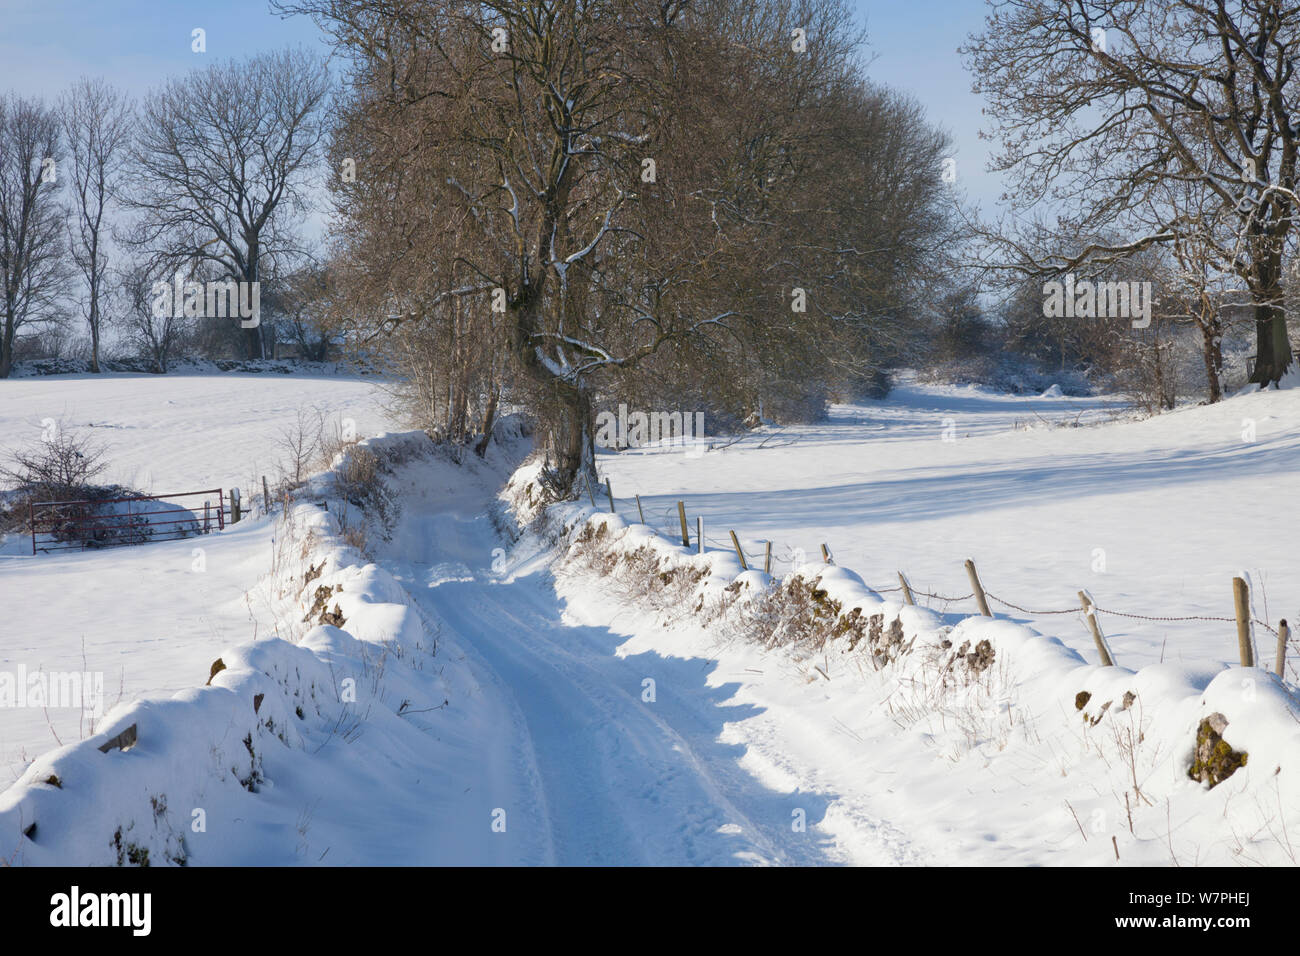 Country lane / track leading out of Bonsall village after heavy snow, Peak District National Park, Derbyshire, UK. January. Stock Photo